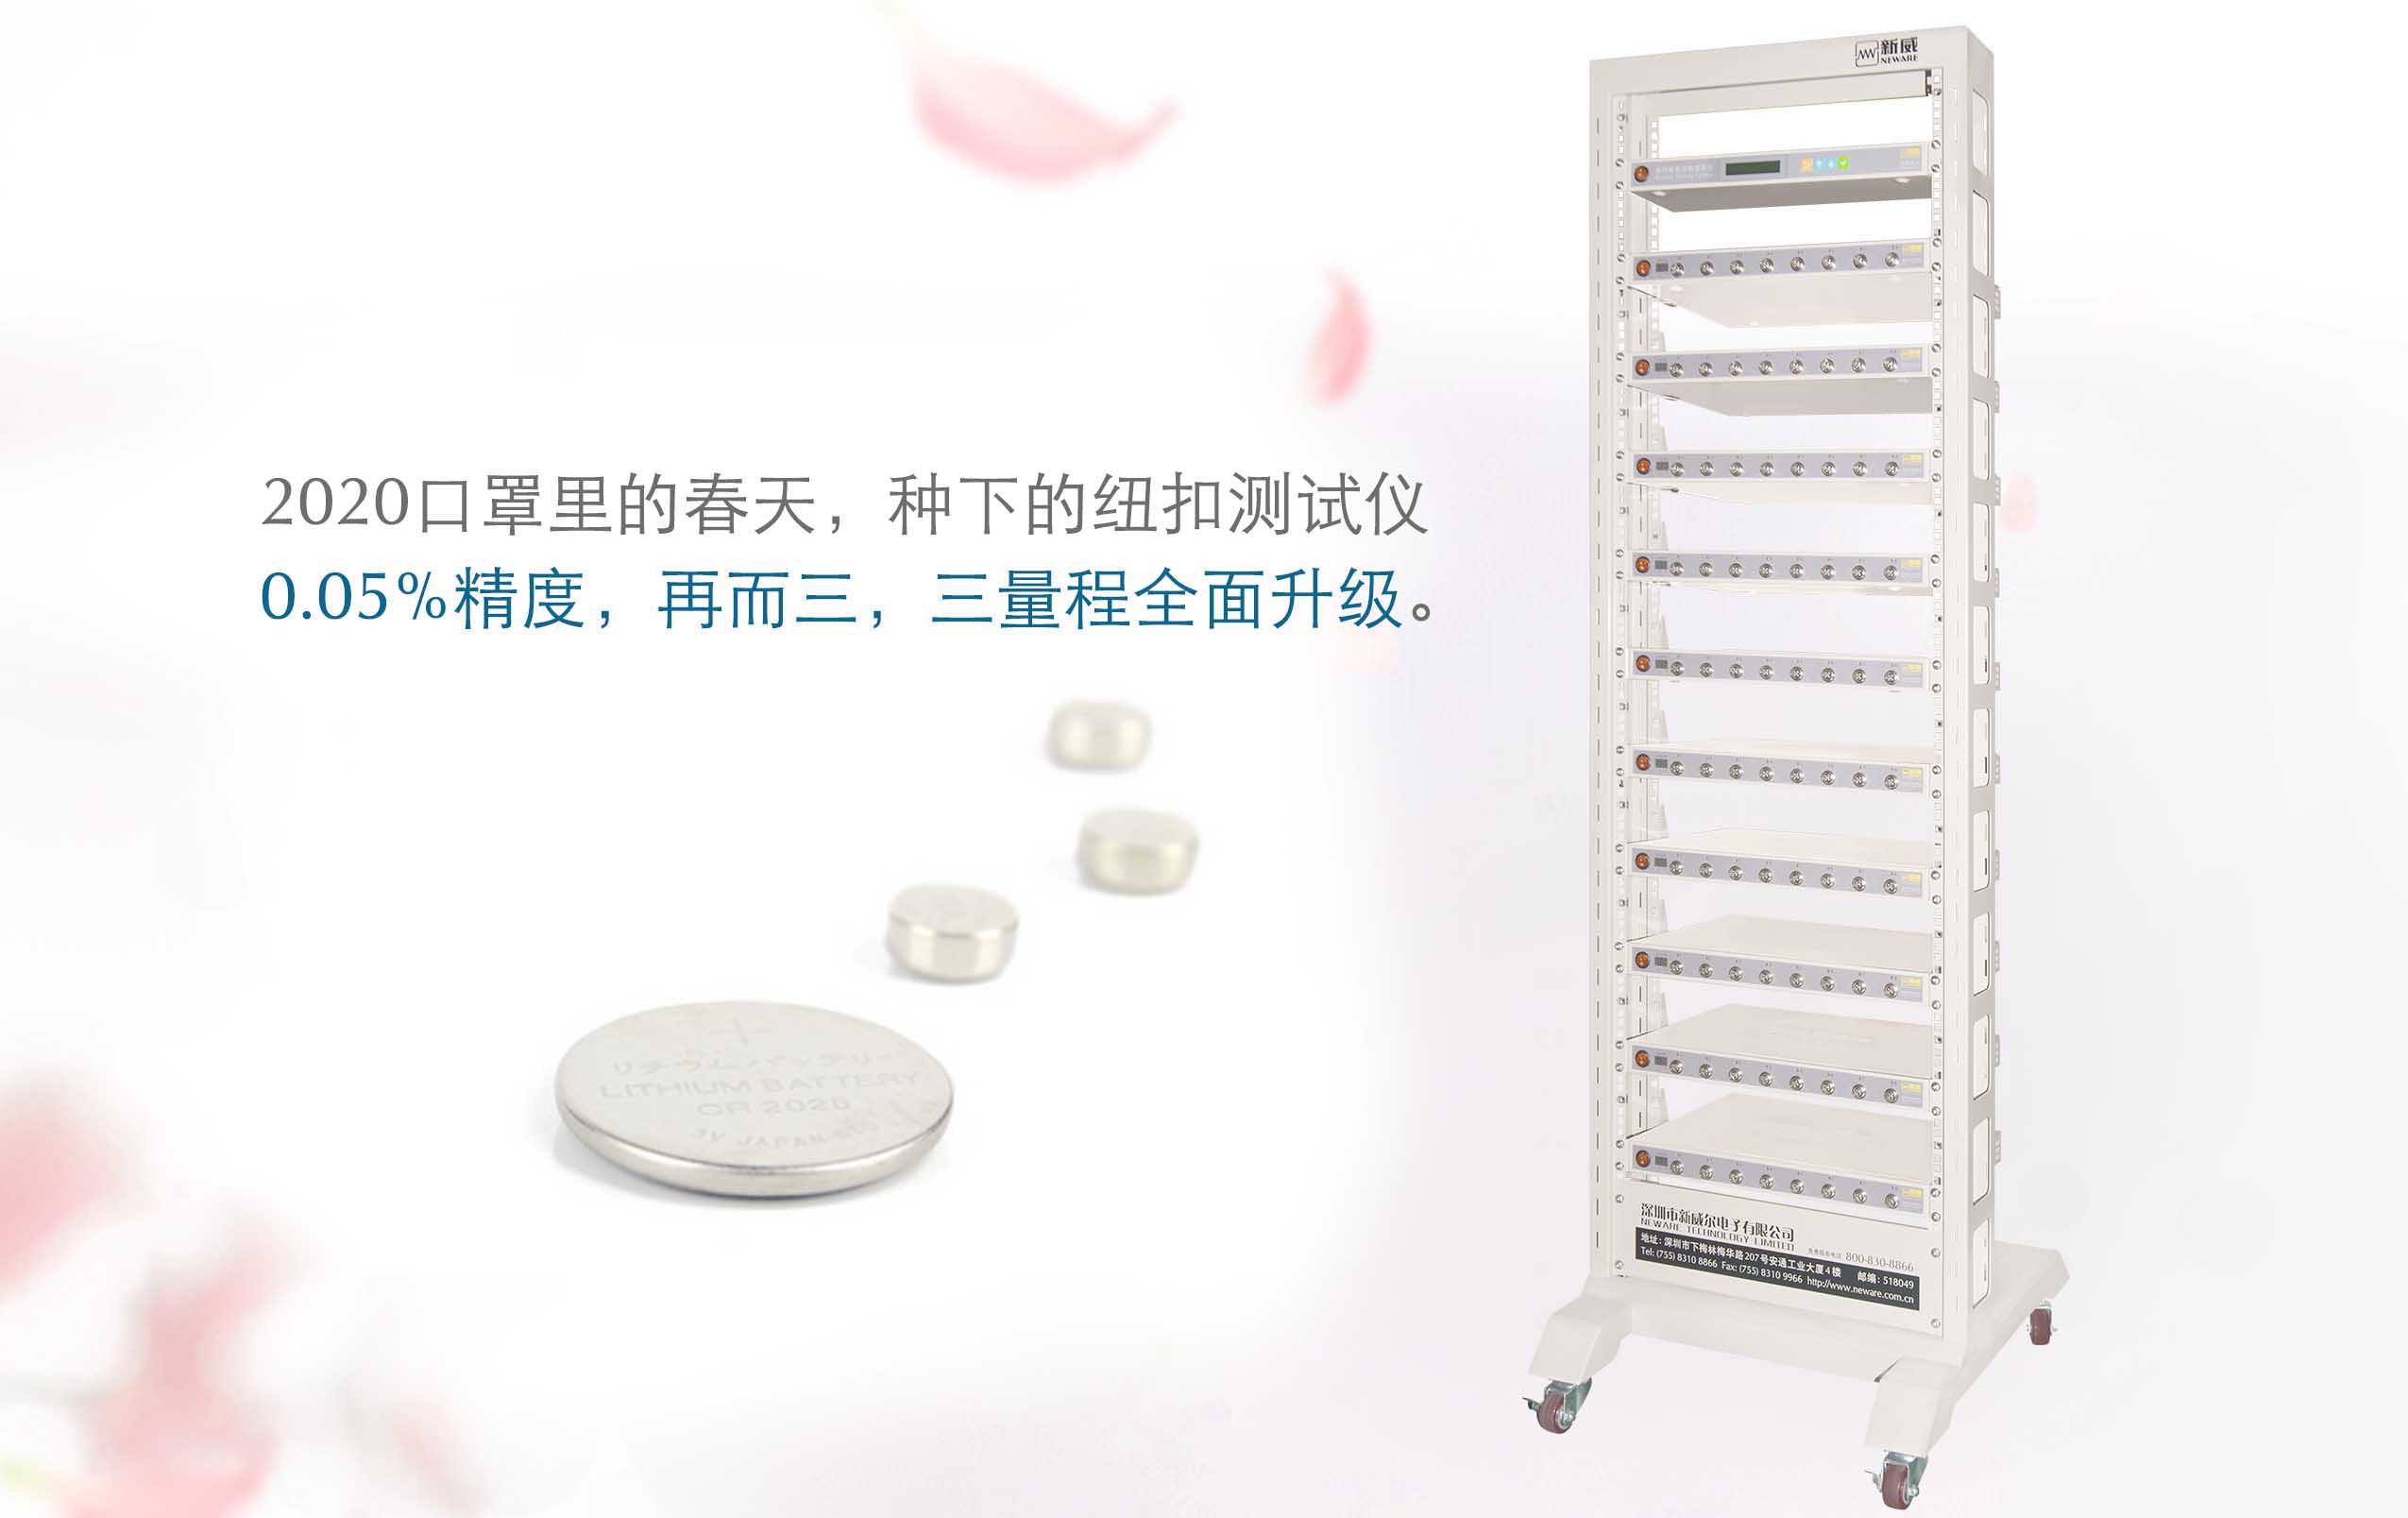 Do you know how to connect Neware 4 series battery testing system in easy way?